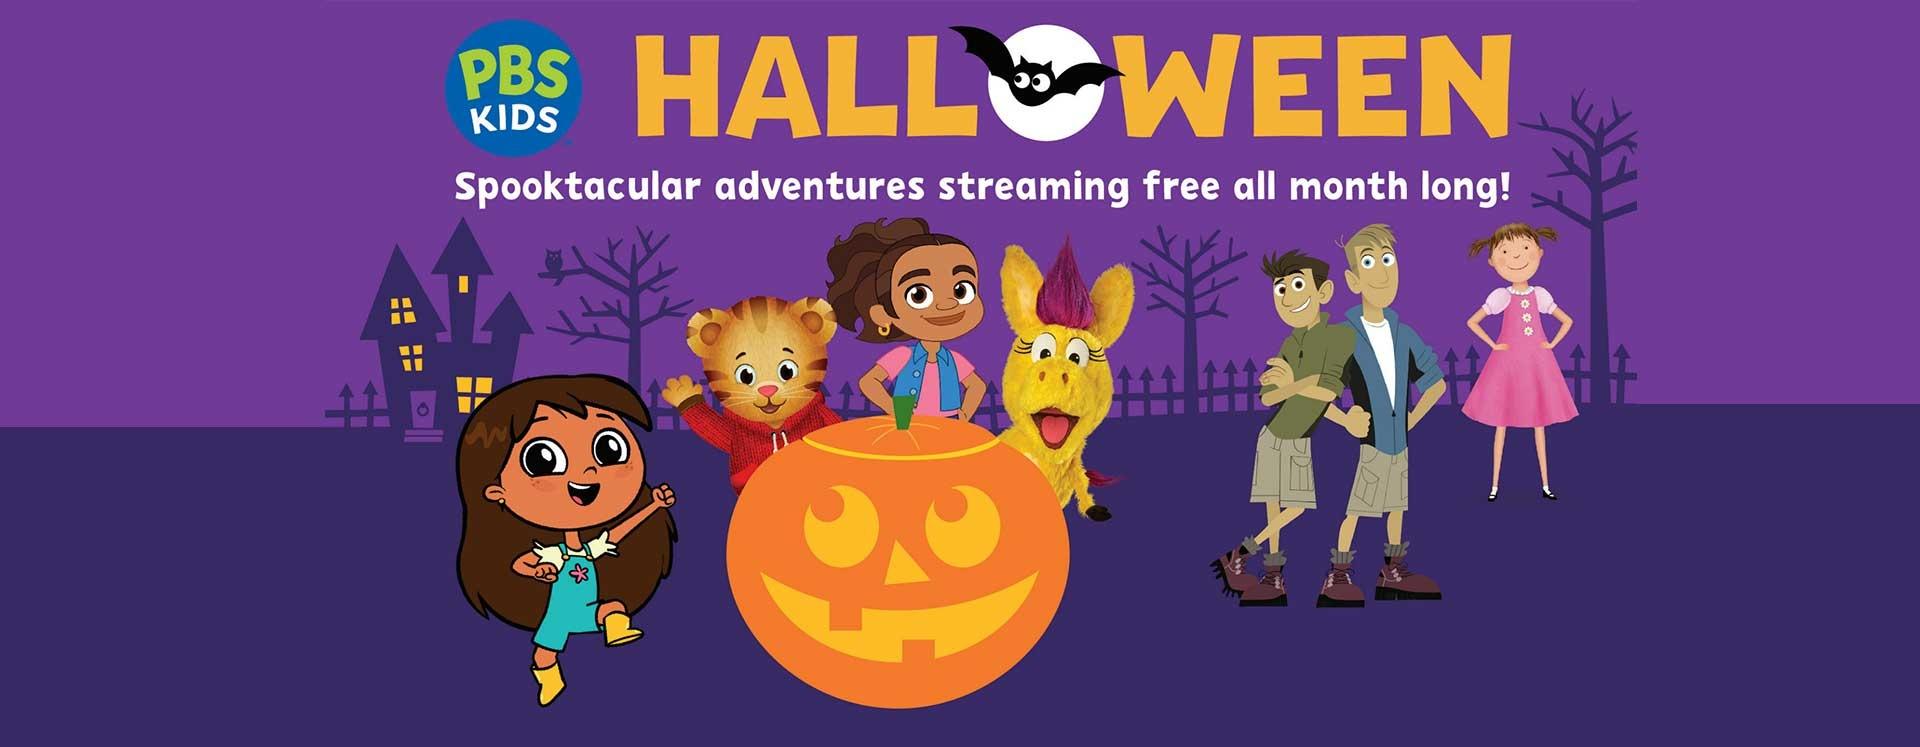 Celebrate Halloween with PBS KIDS